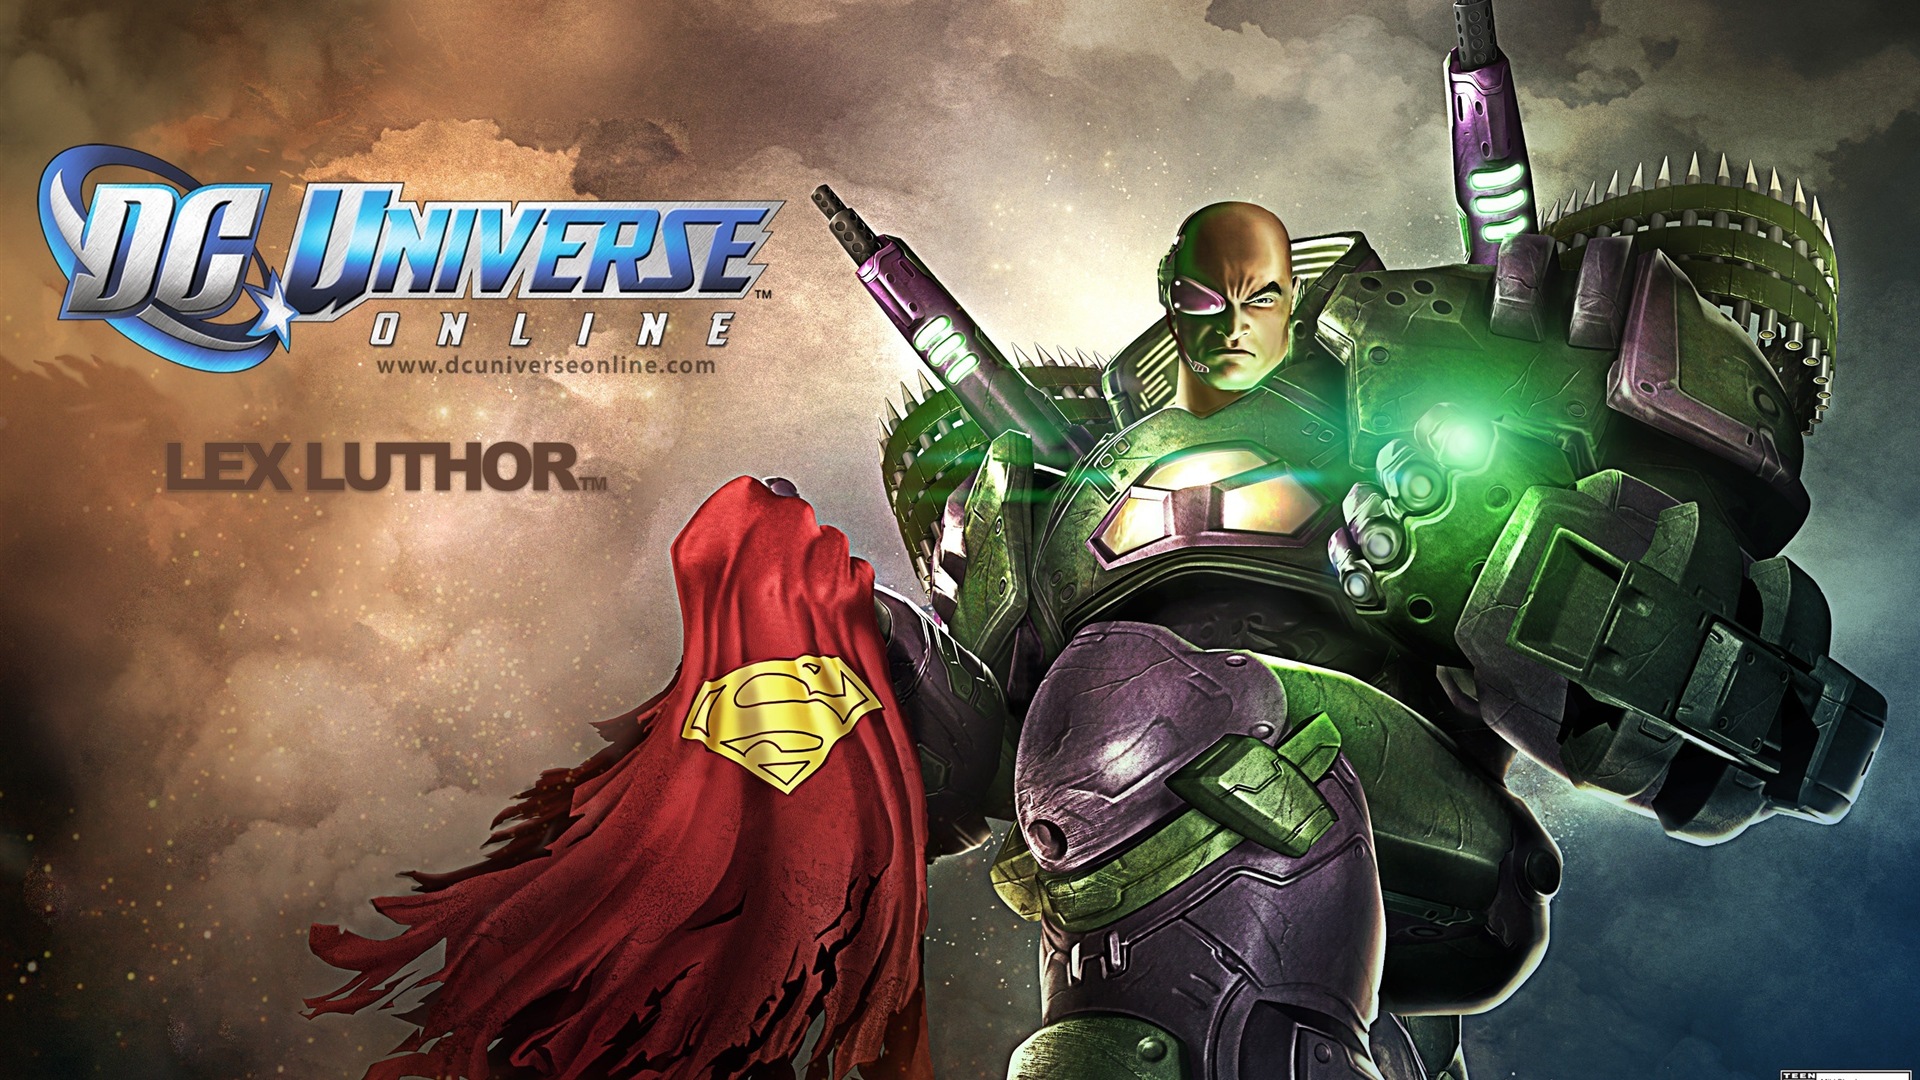 DC Universe Online HD game wallpapers #19 - 1920x1080